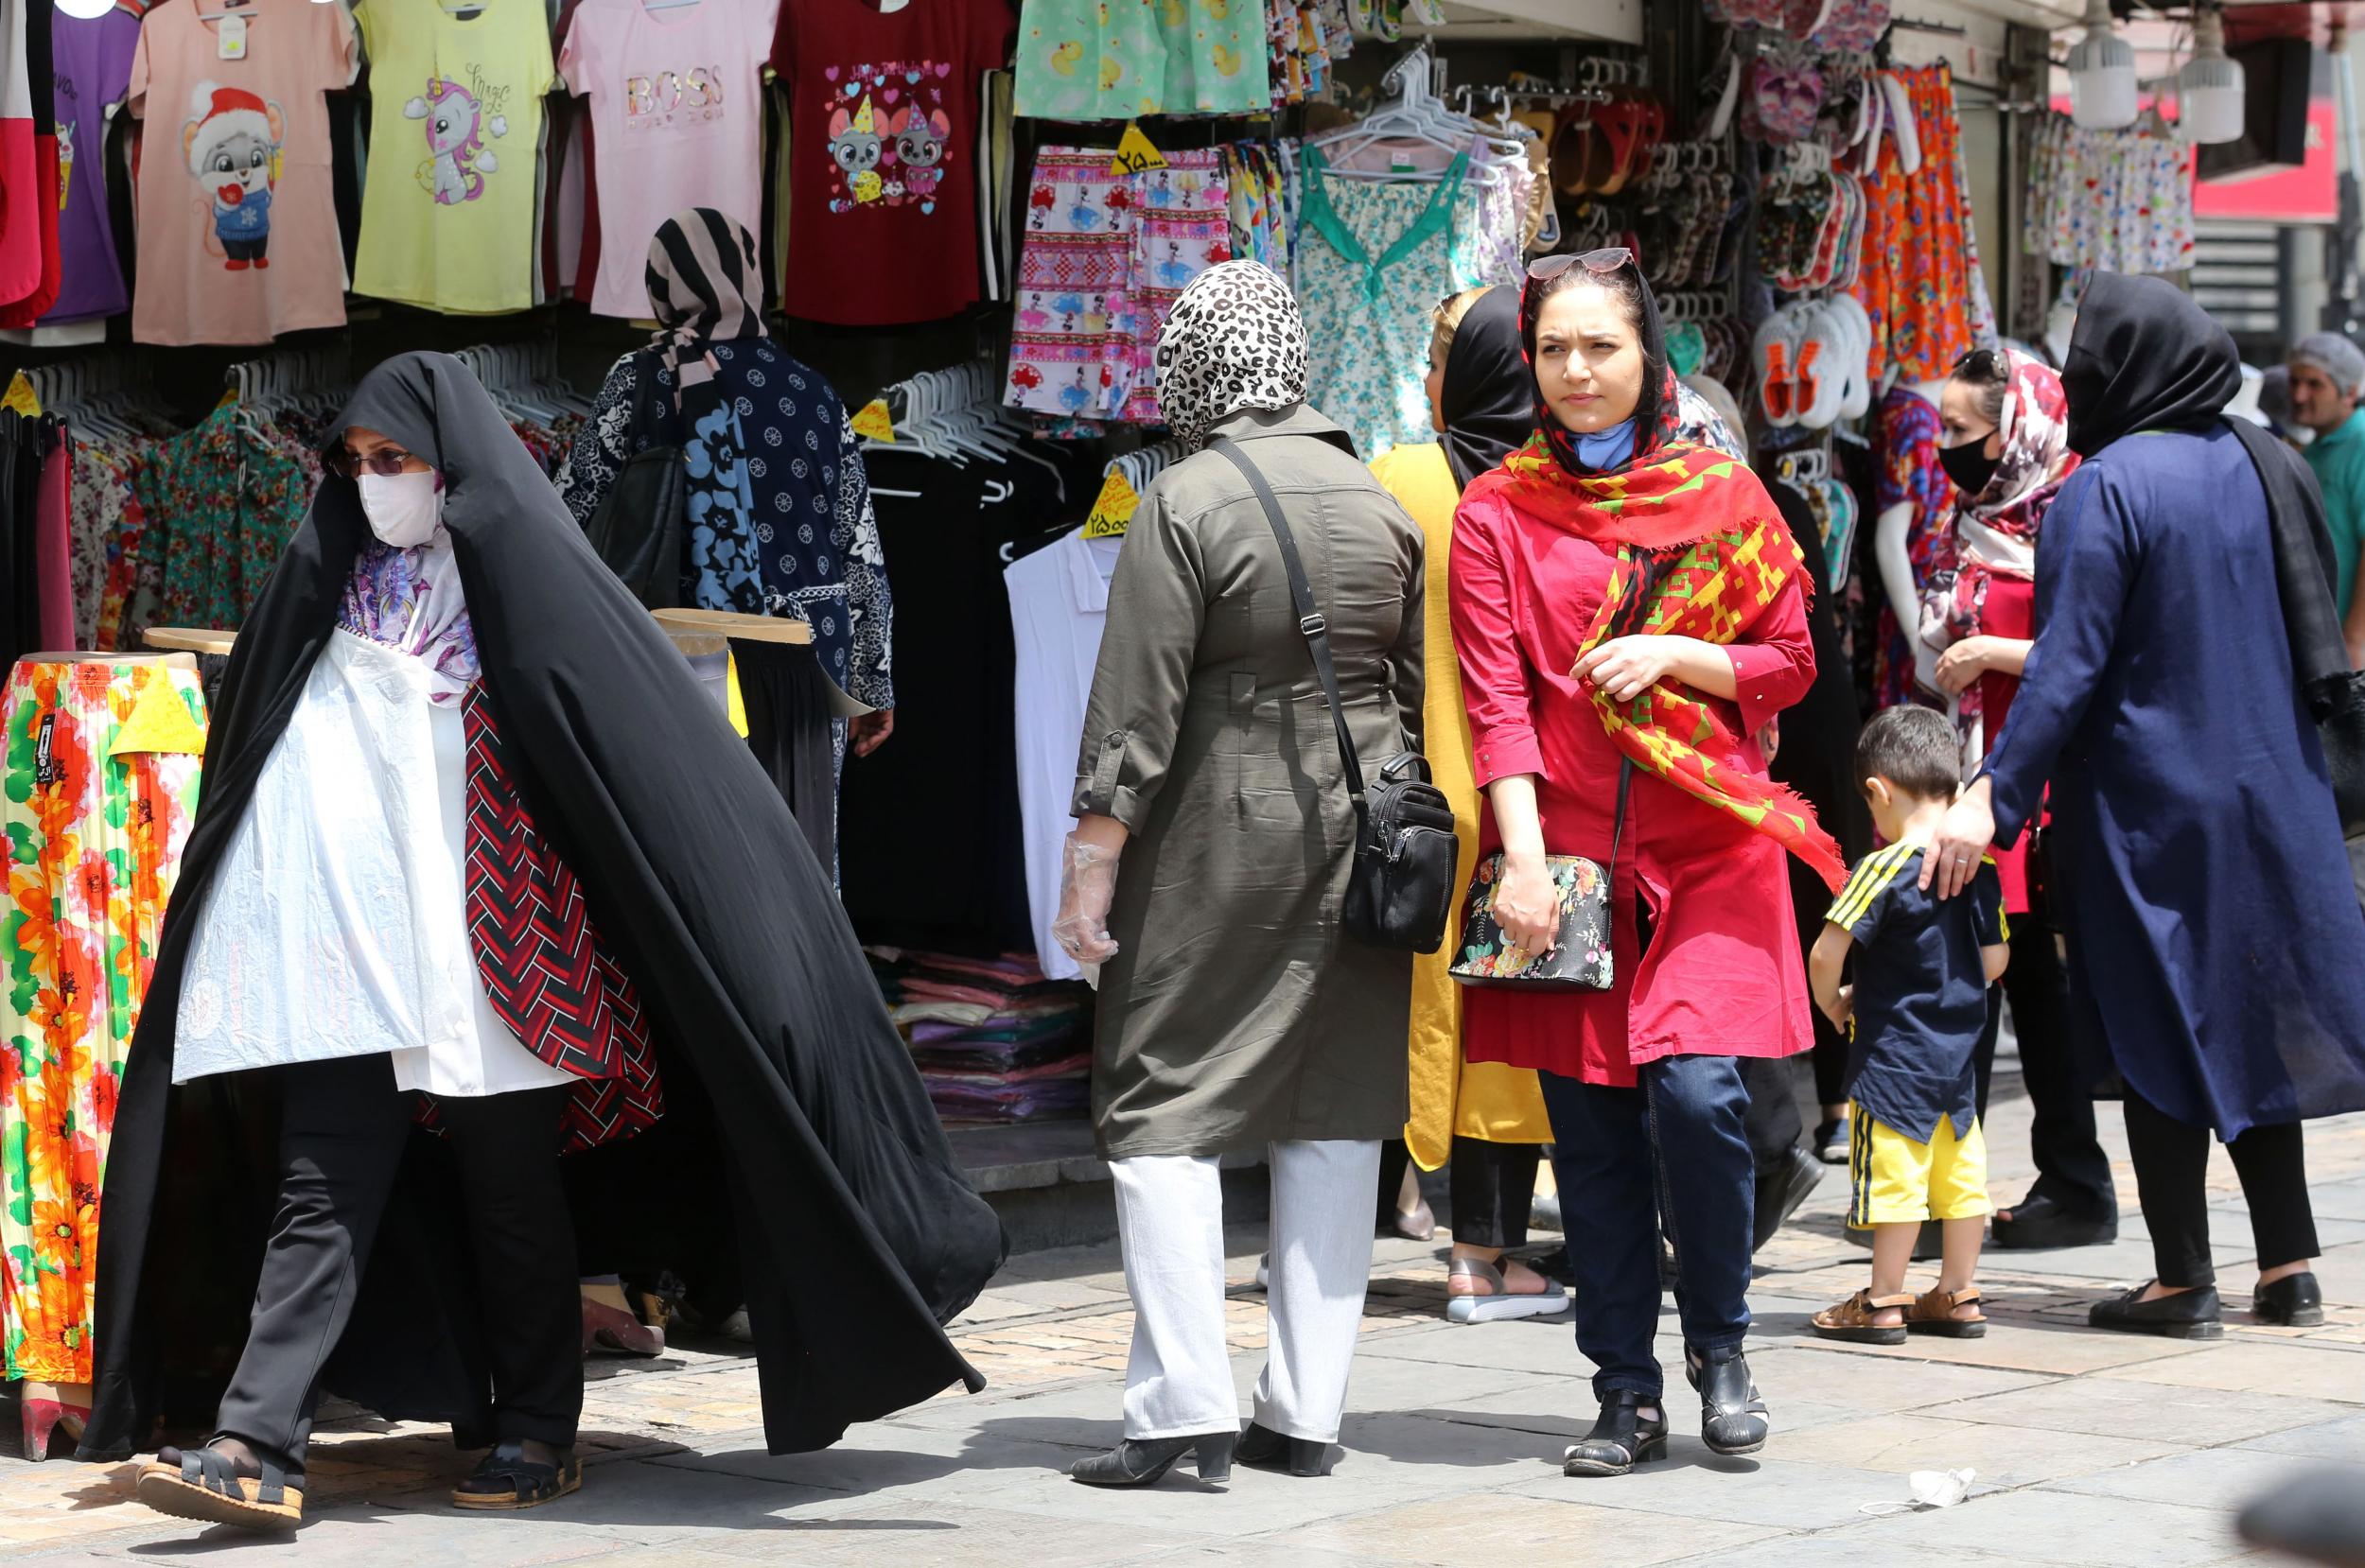 People shop in Tehran as officials say country is now ignoring social distancing rules